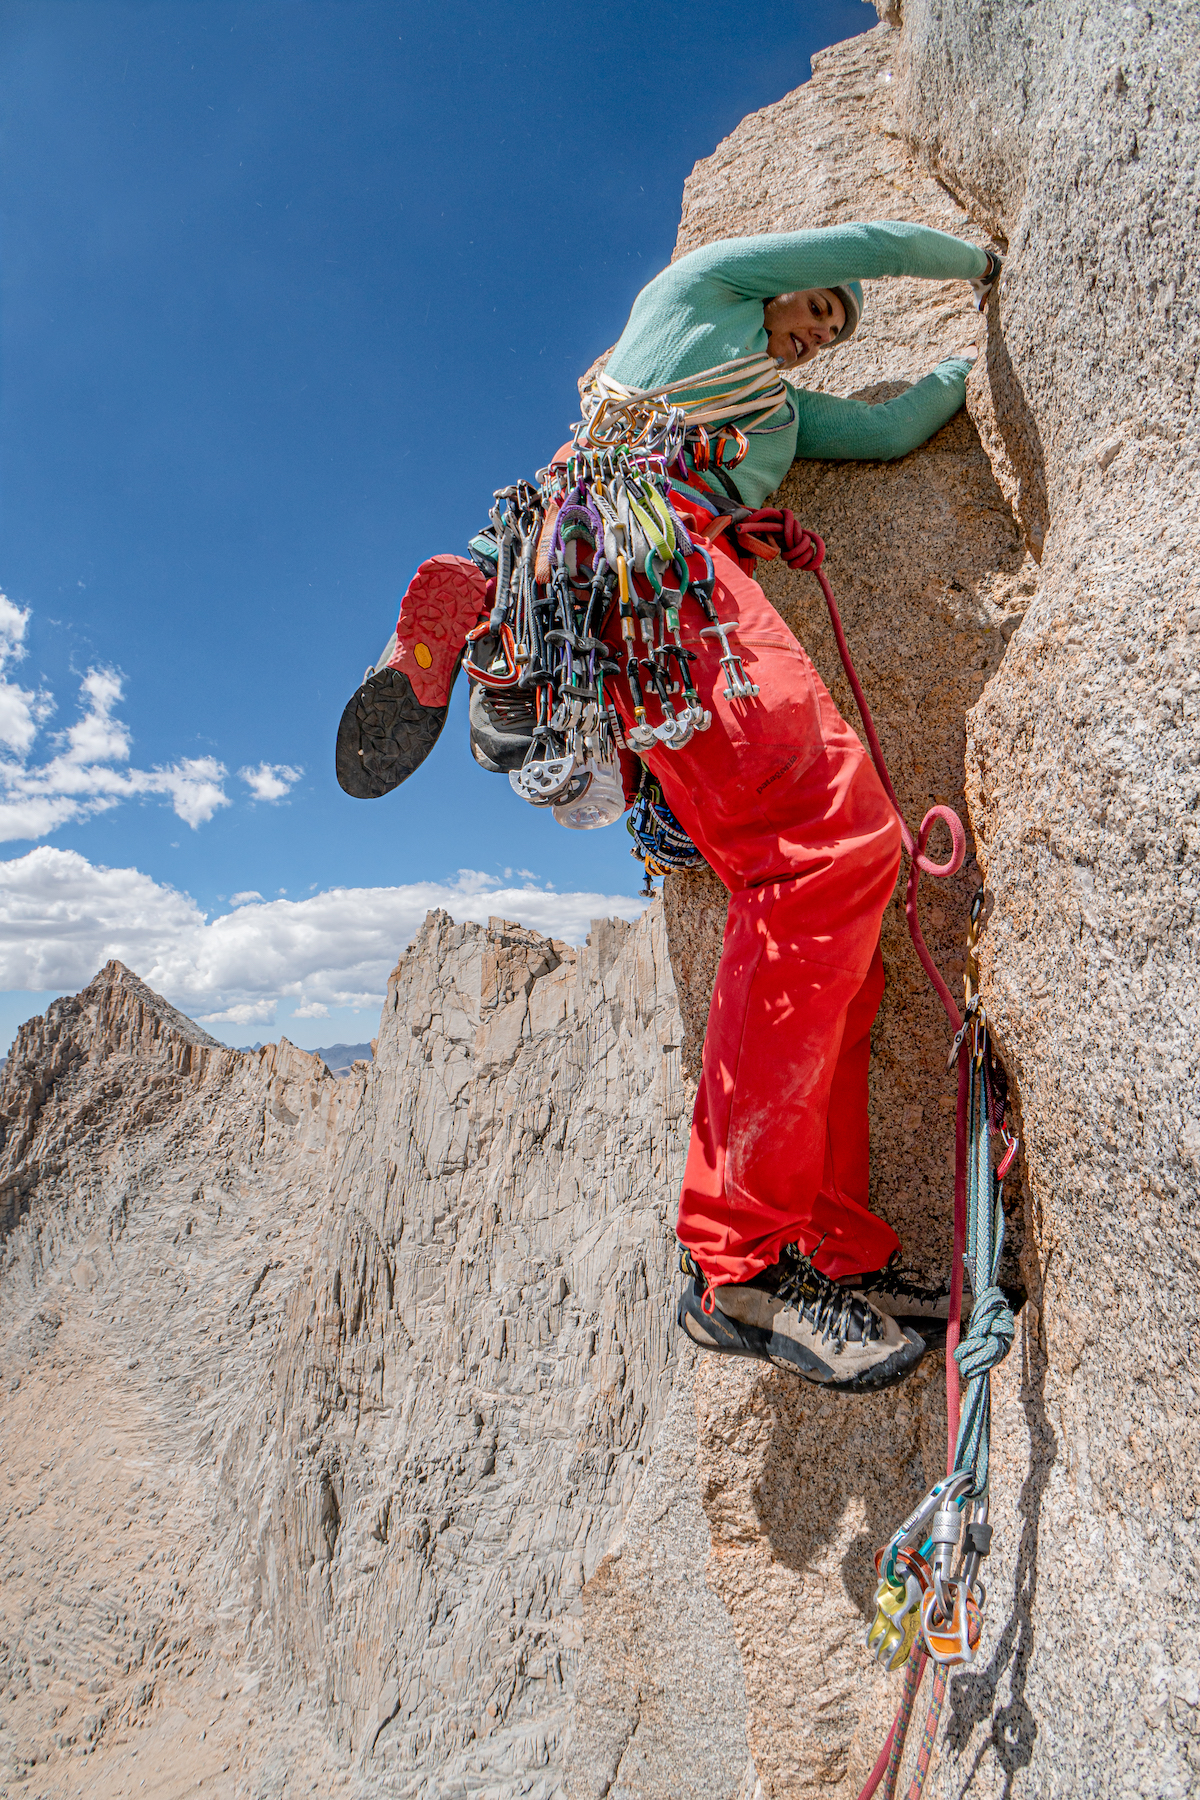 With a light rack of Revolutions and a cool breeze, Jane Jackson jams for joy on the West face of Mt. Russell, California. [Photo] Tad McCrea